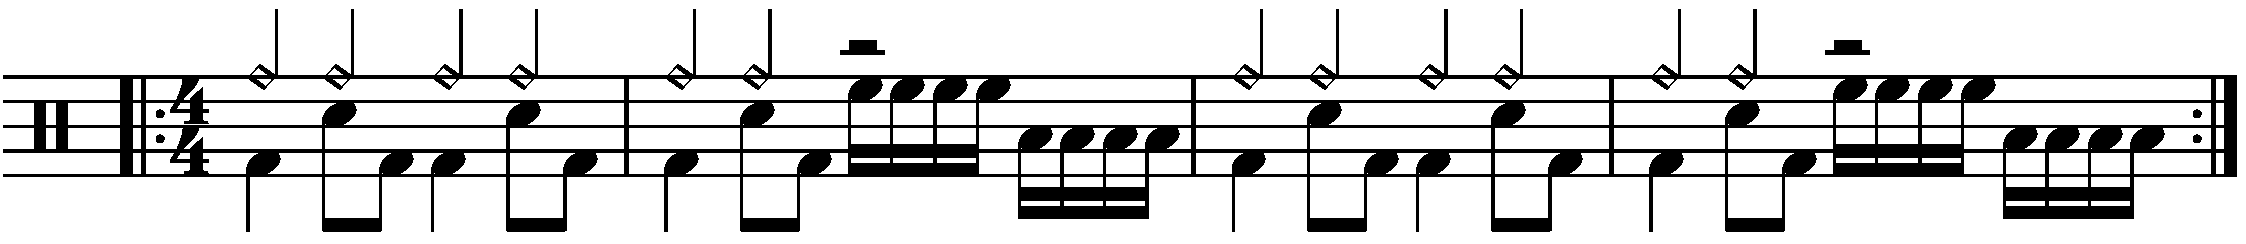 A repeated two bar phrase using sixteenth note fills.